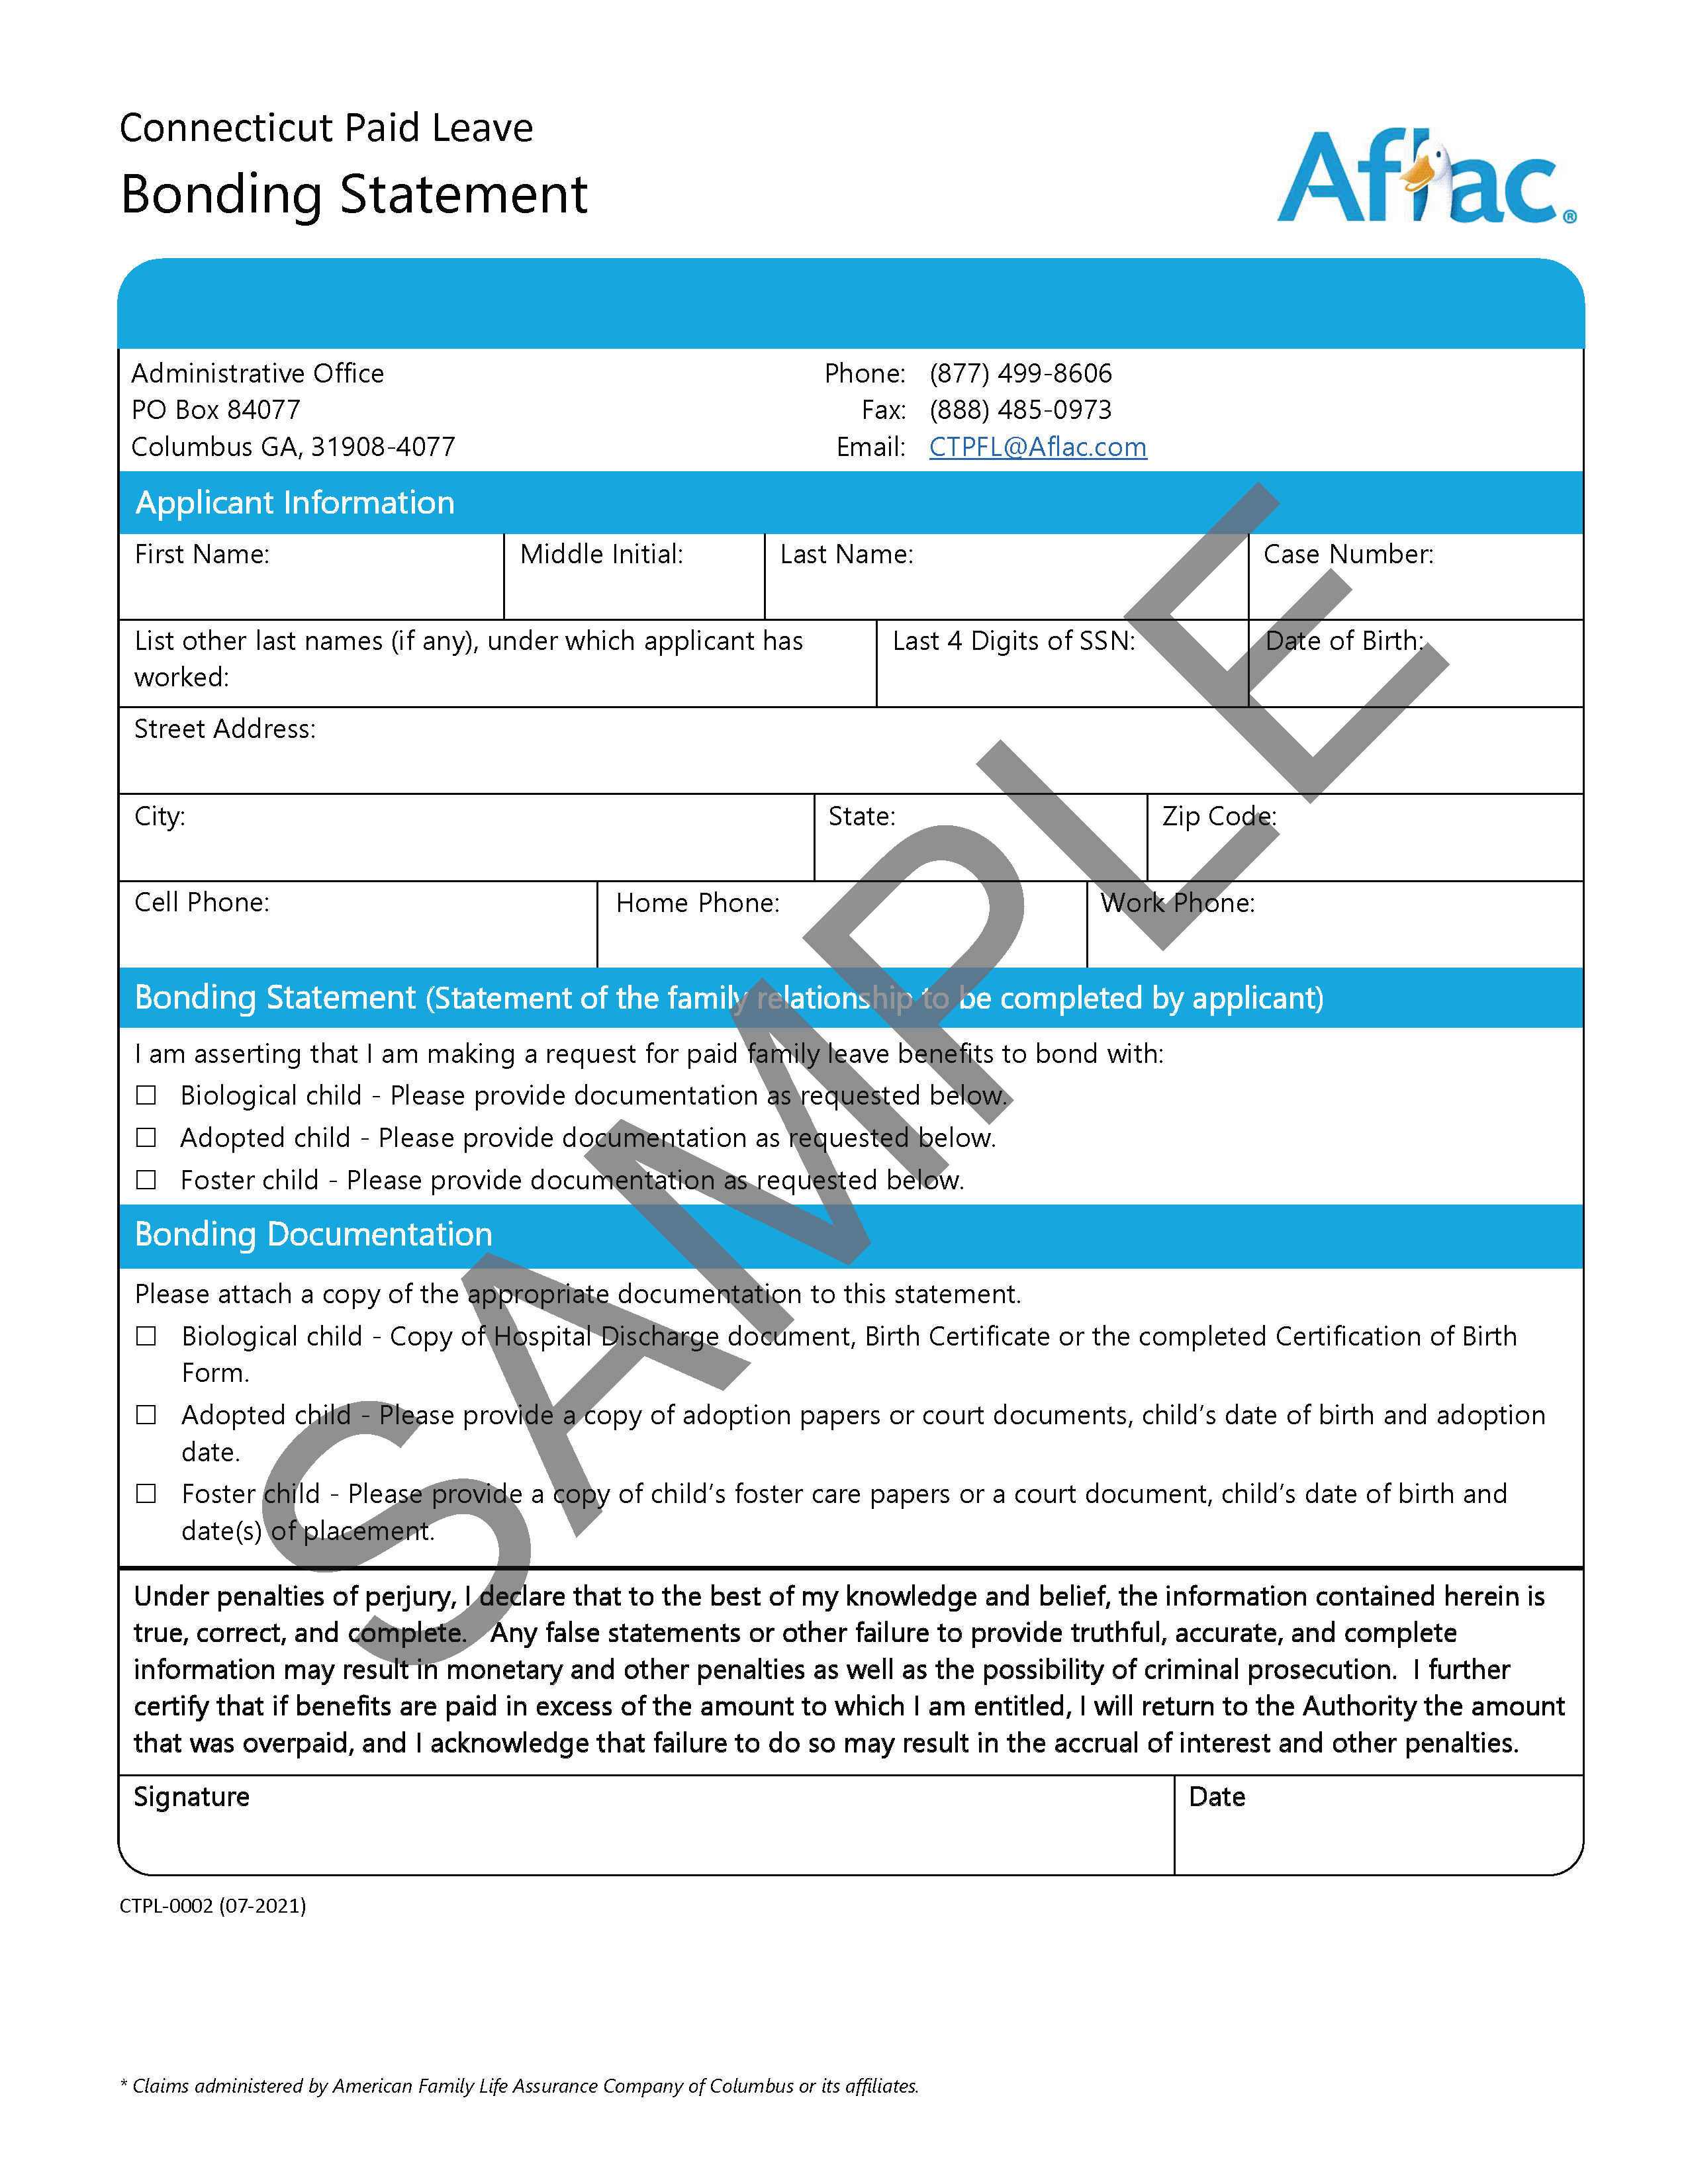 Sample image of the Bonding Statement Form